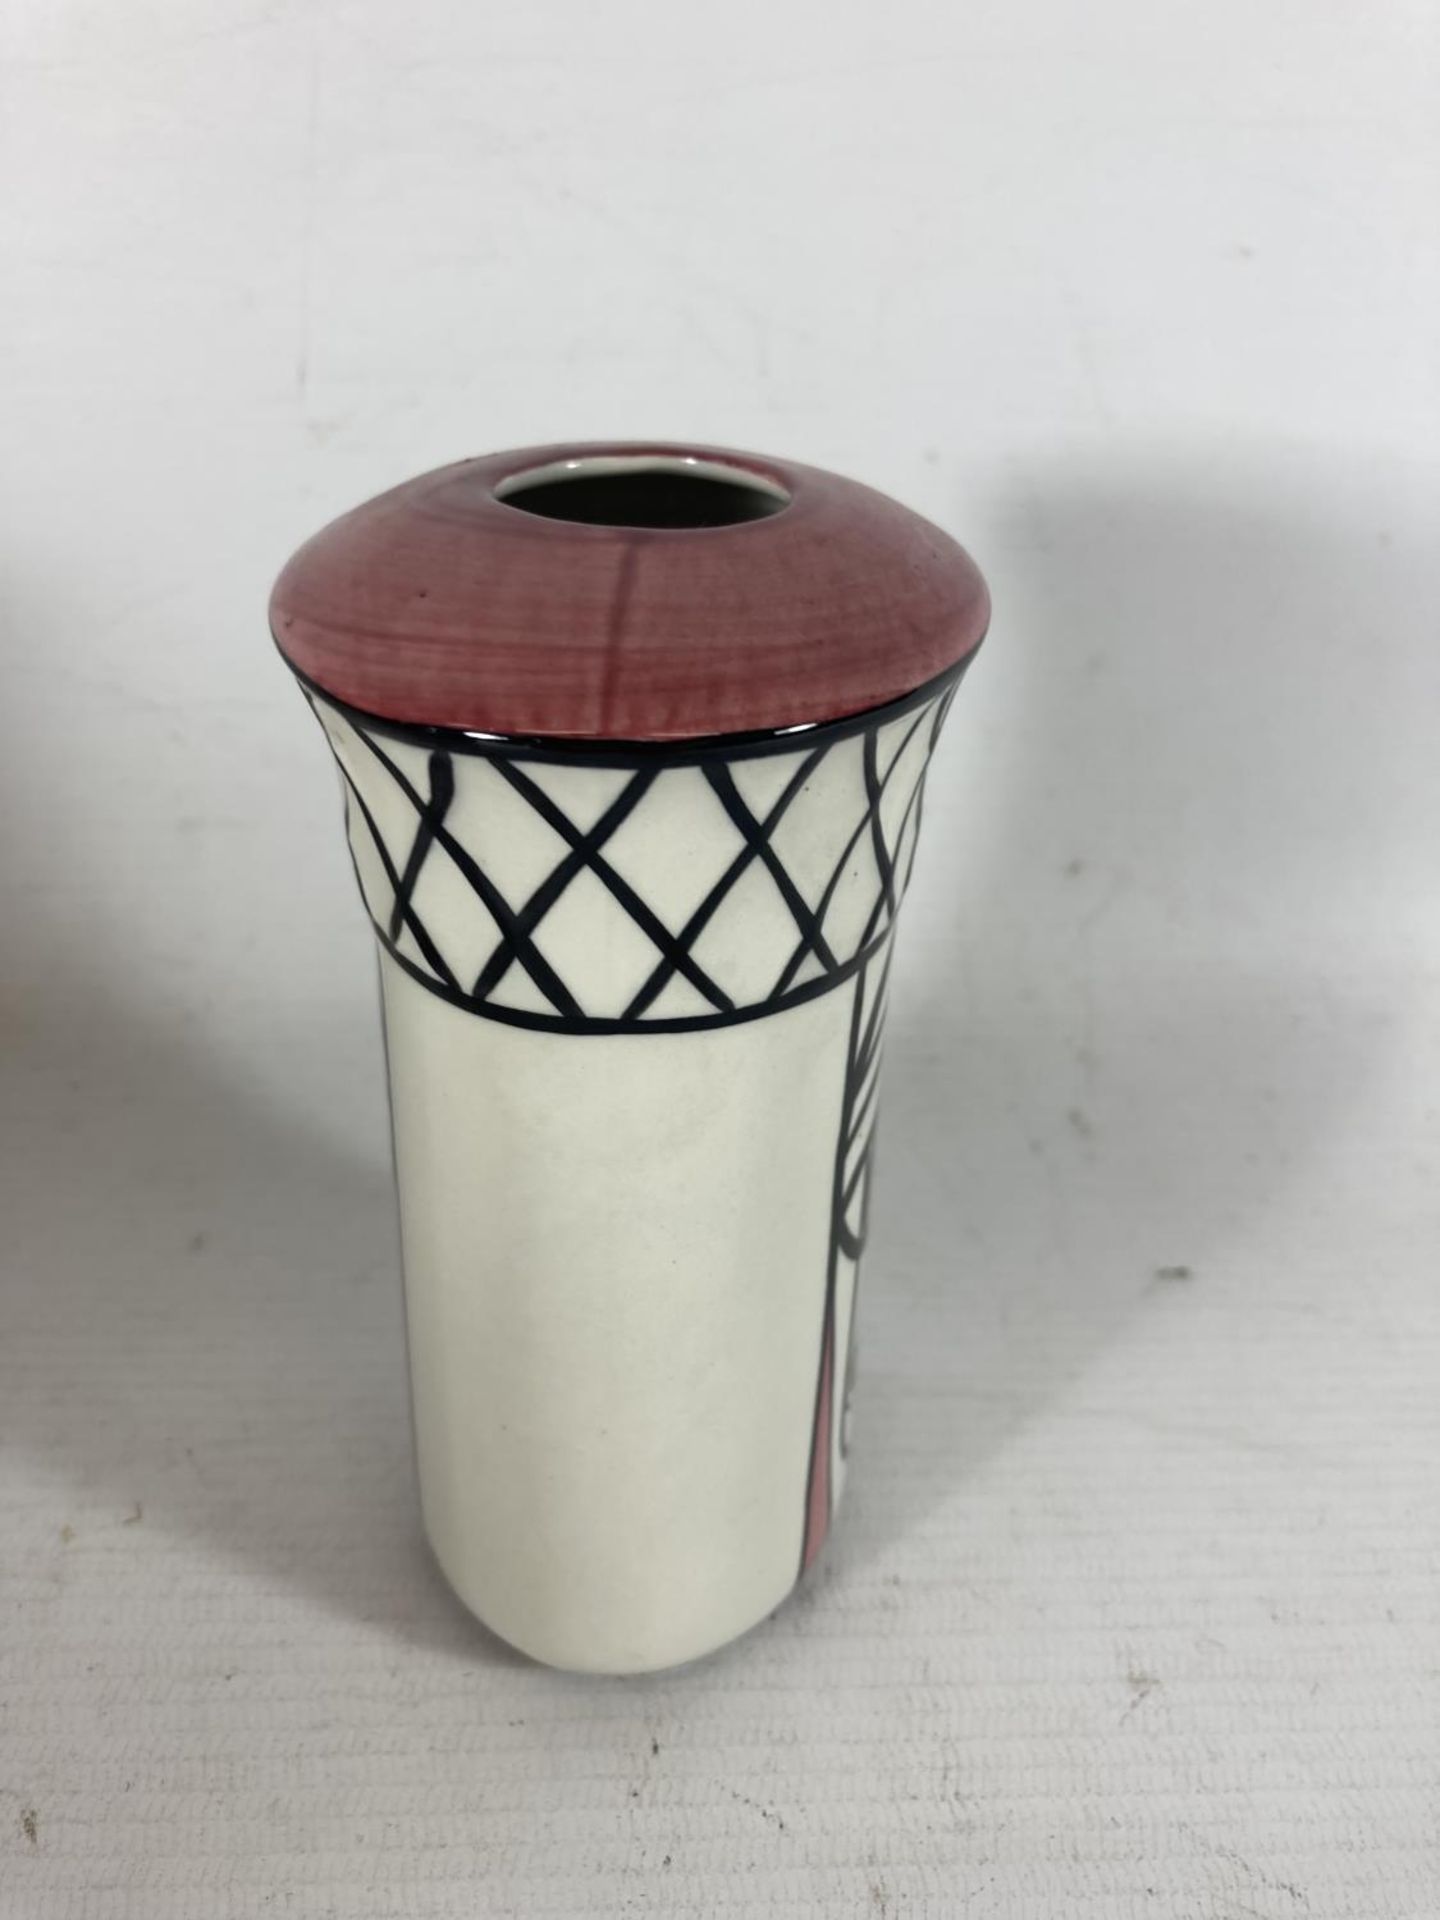 A HANDPAINTED AND SIGNED LORNA BAILEY BUD VASE CHARLES RENE MACINTOSH PATTERN - Image 2 of 3